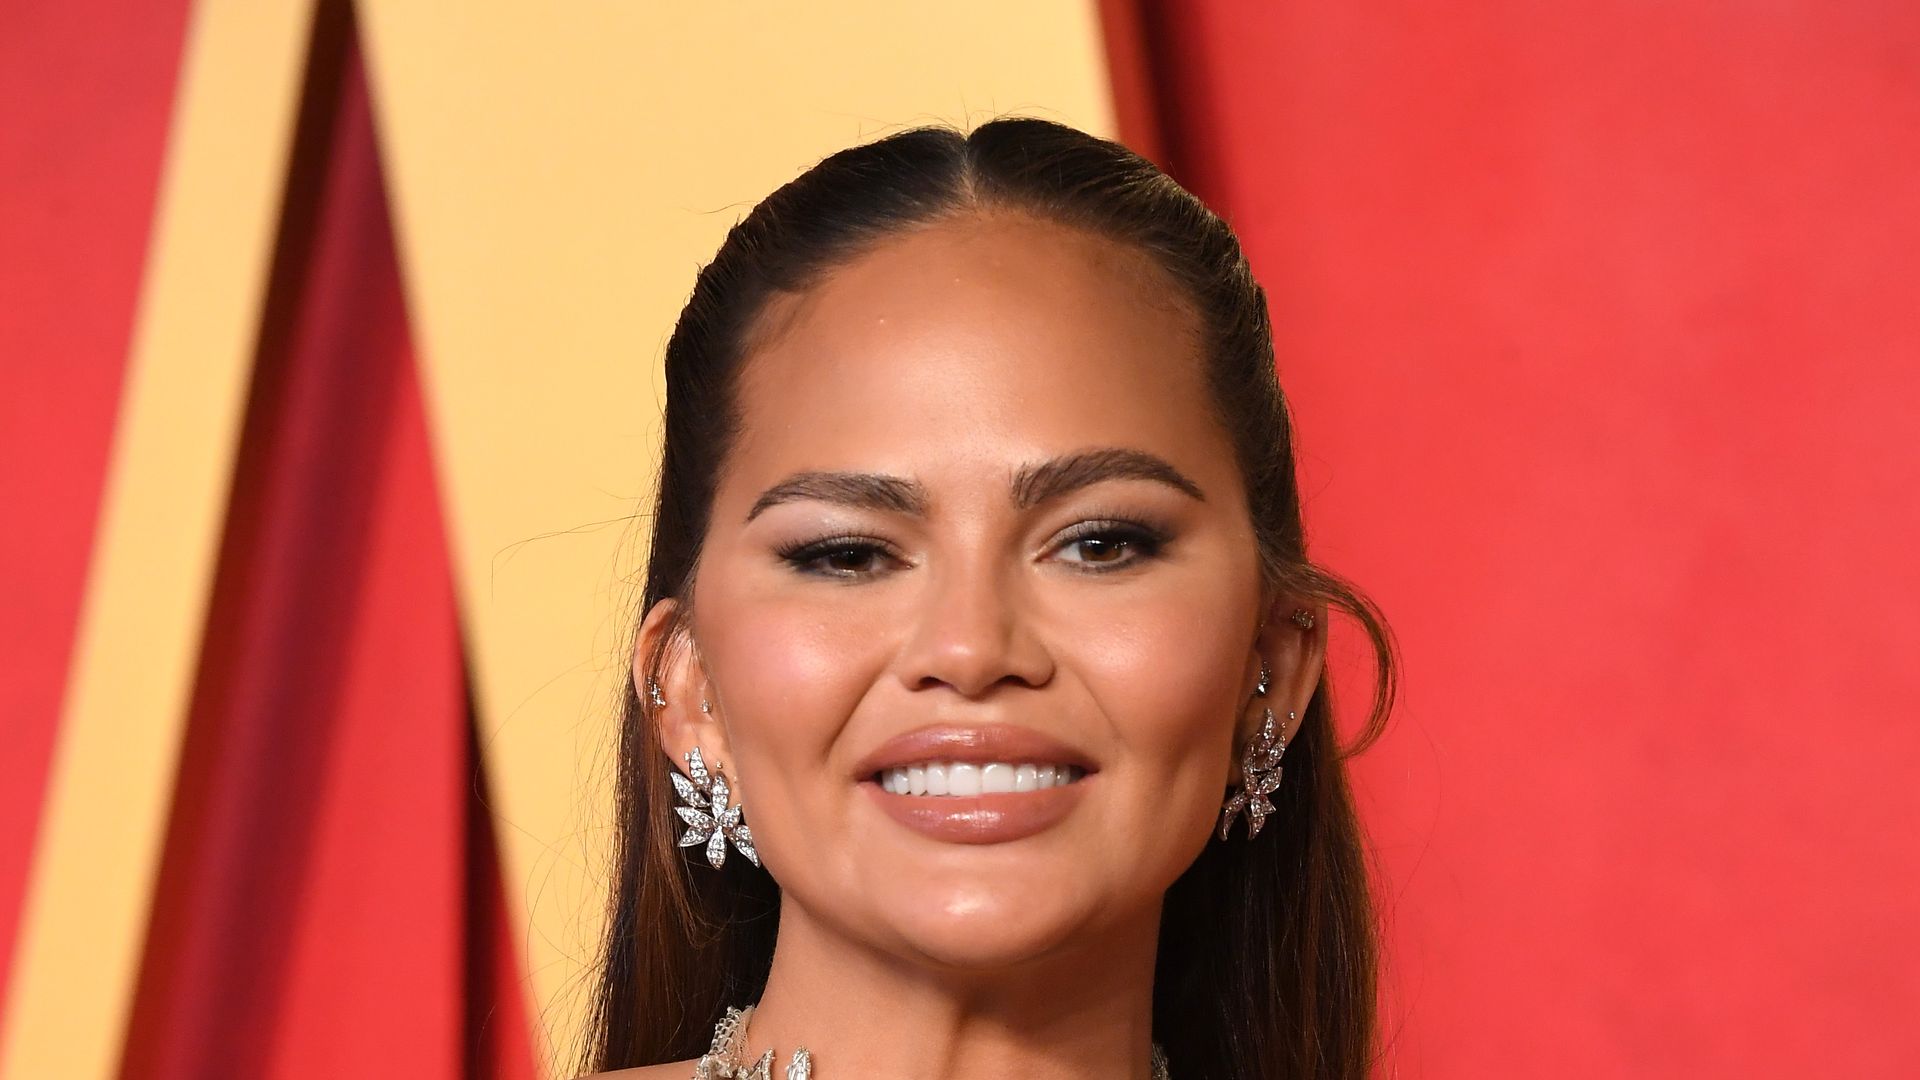 BEVERLY HILLS, CALIFORNIA - MARCH 10: Chrissy Teigen arrives at the 2024 Vanity Fair Oscar Party Hosted By Radhika Jones at Wallis Annenberg Center for the Performing Arts on March 10, 2024 in Beverly Hills, California. (Photo by Steve Granitz/FilmMagic)